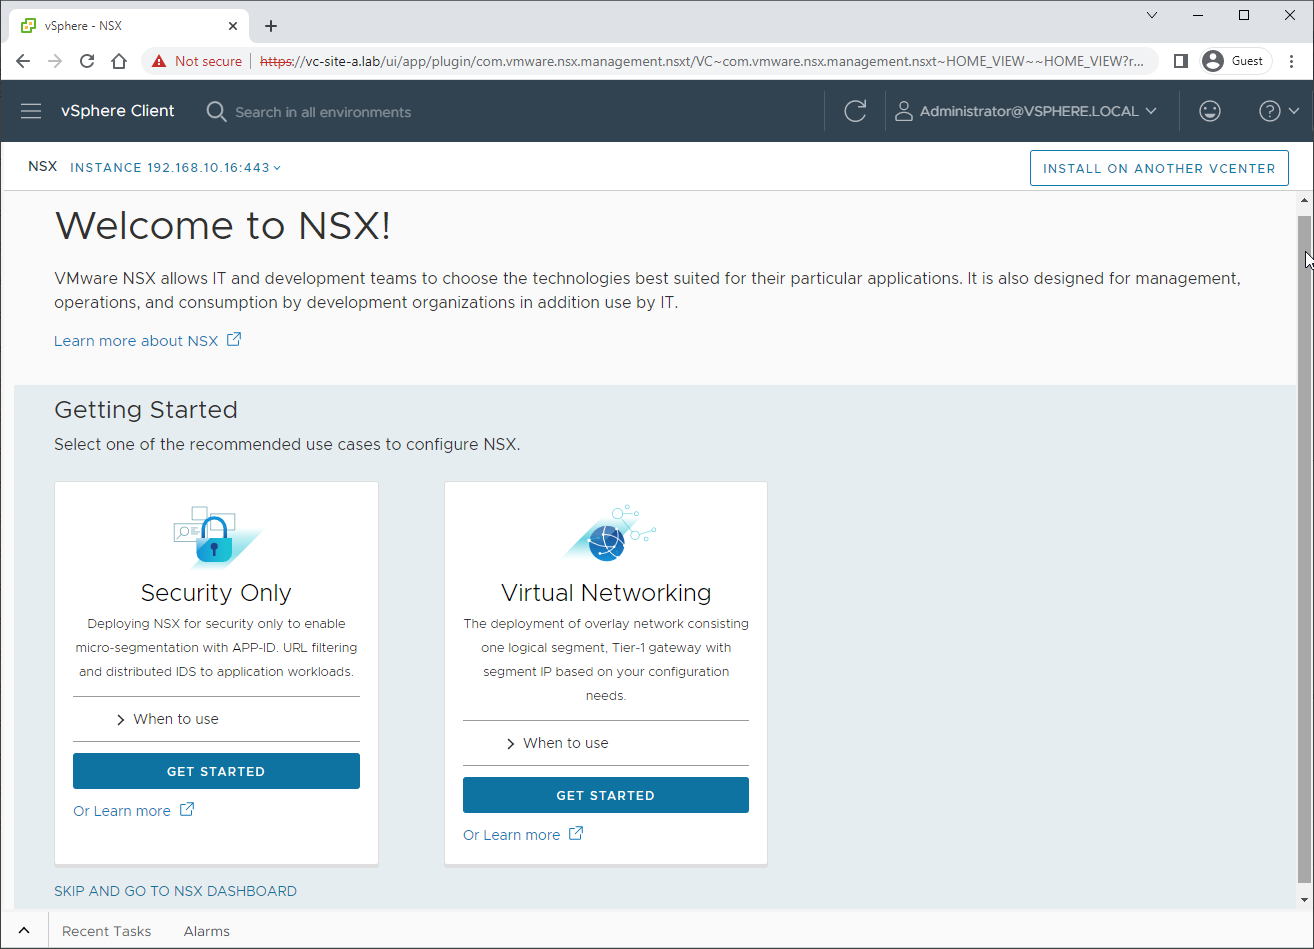 Select one of the recommended use cases to configure NSX